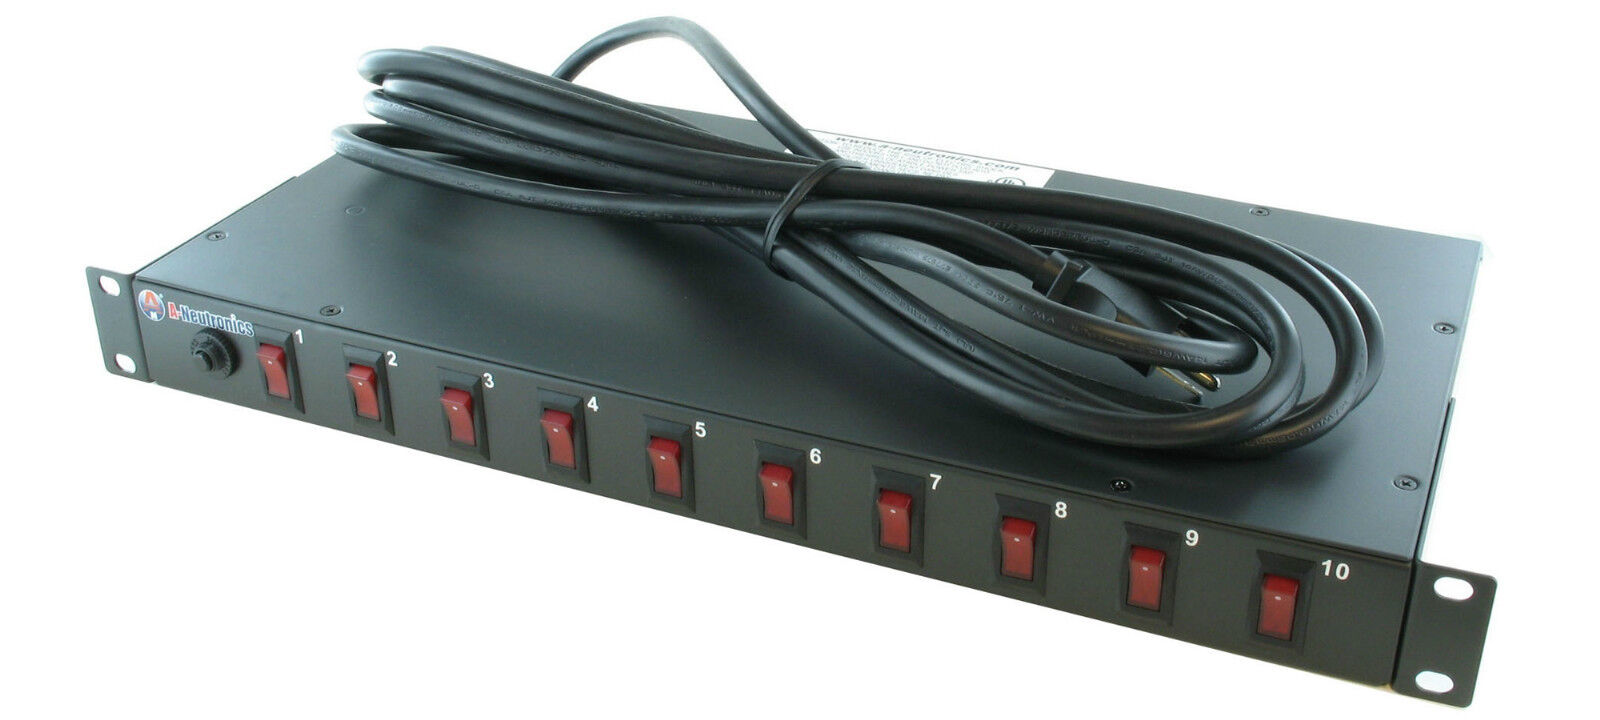 10 OUTLET RACK MOUNT POWER STRIP PDU LIGHT CONTROLLER w/ LIGHTED POWER SWITCHES